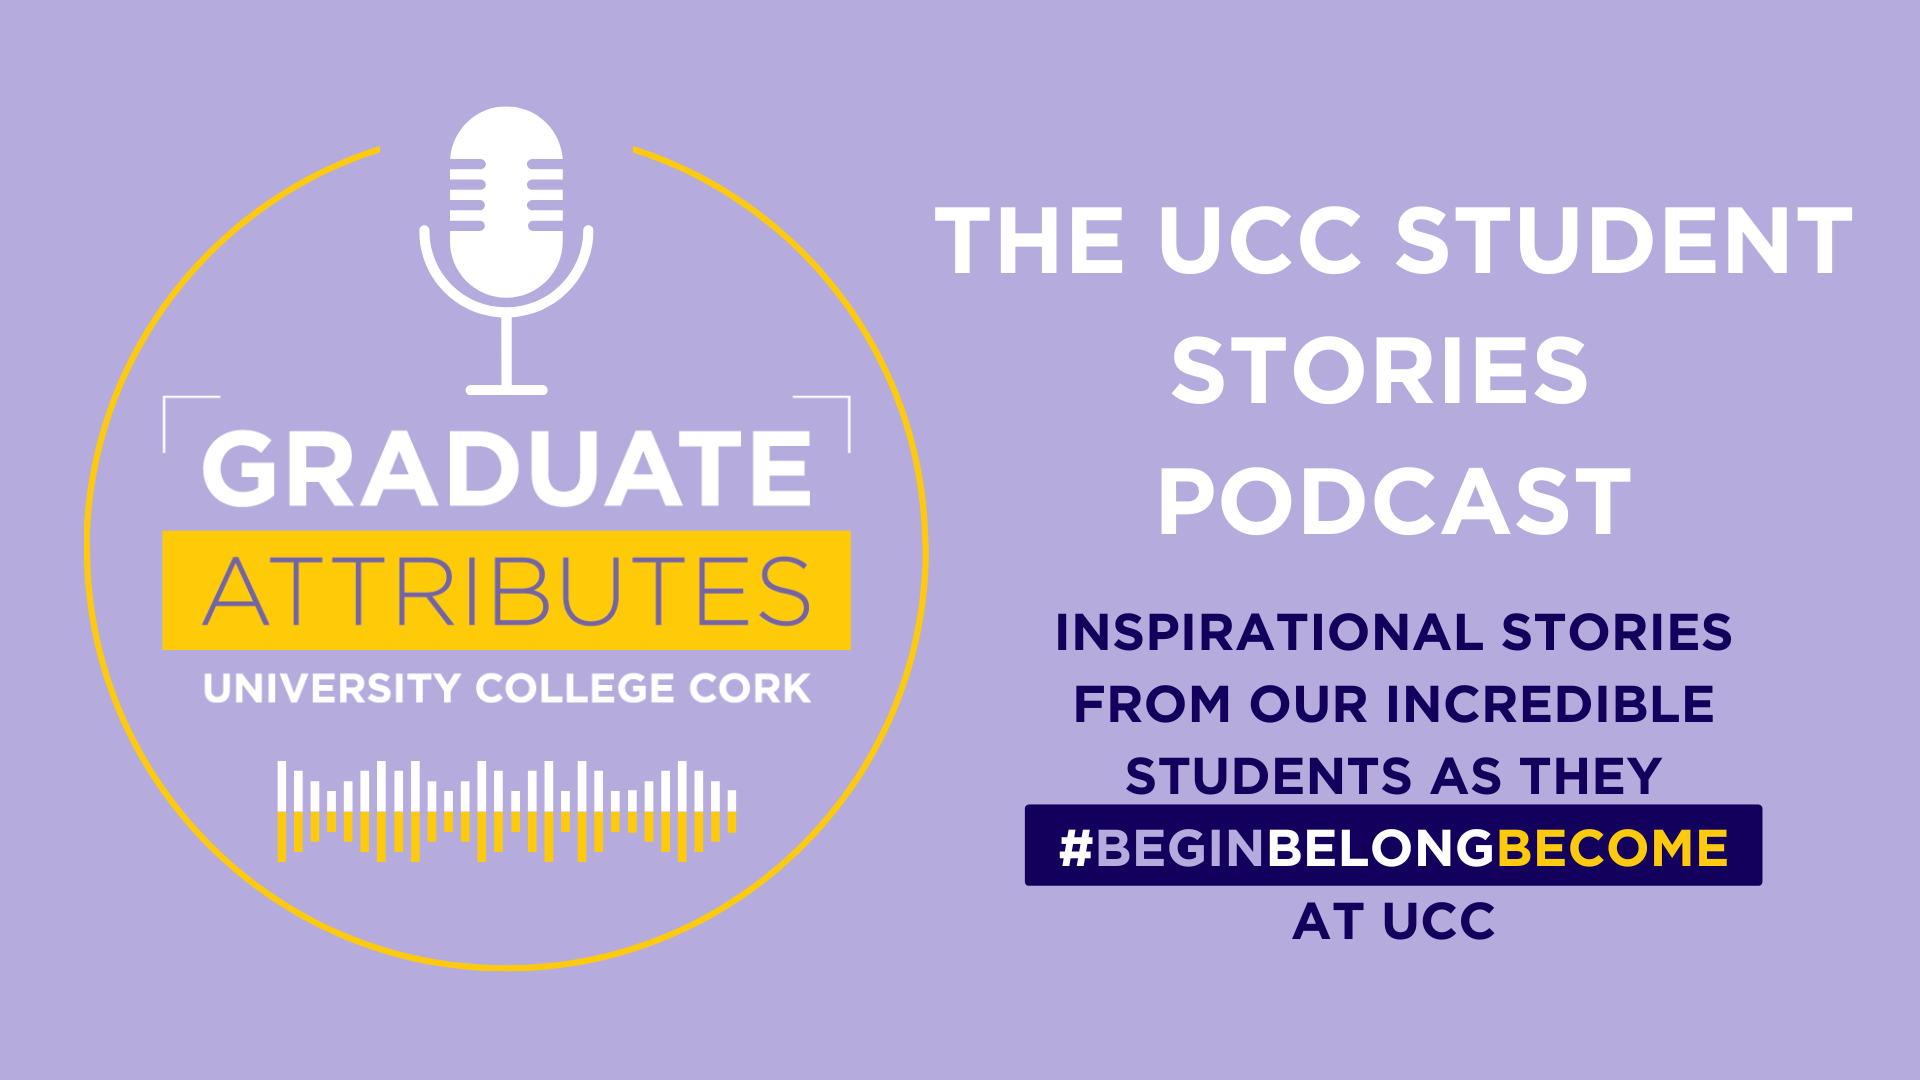 Why you should check out the UCC Student Stories Podcast